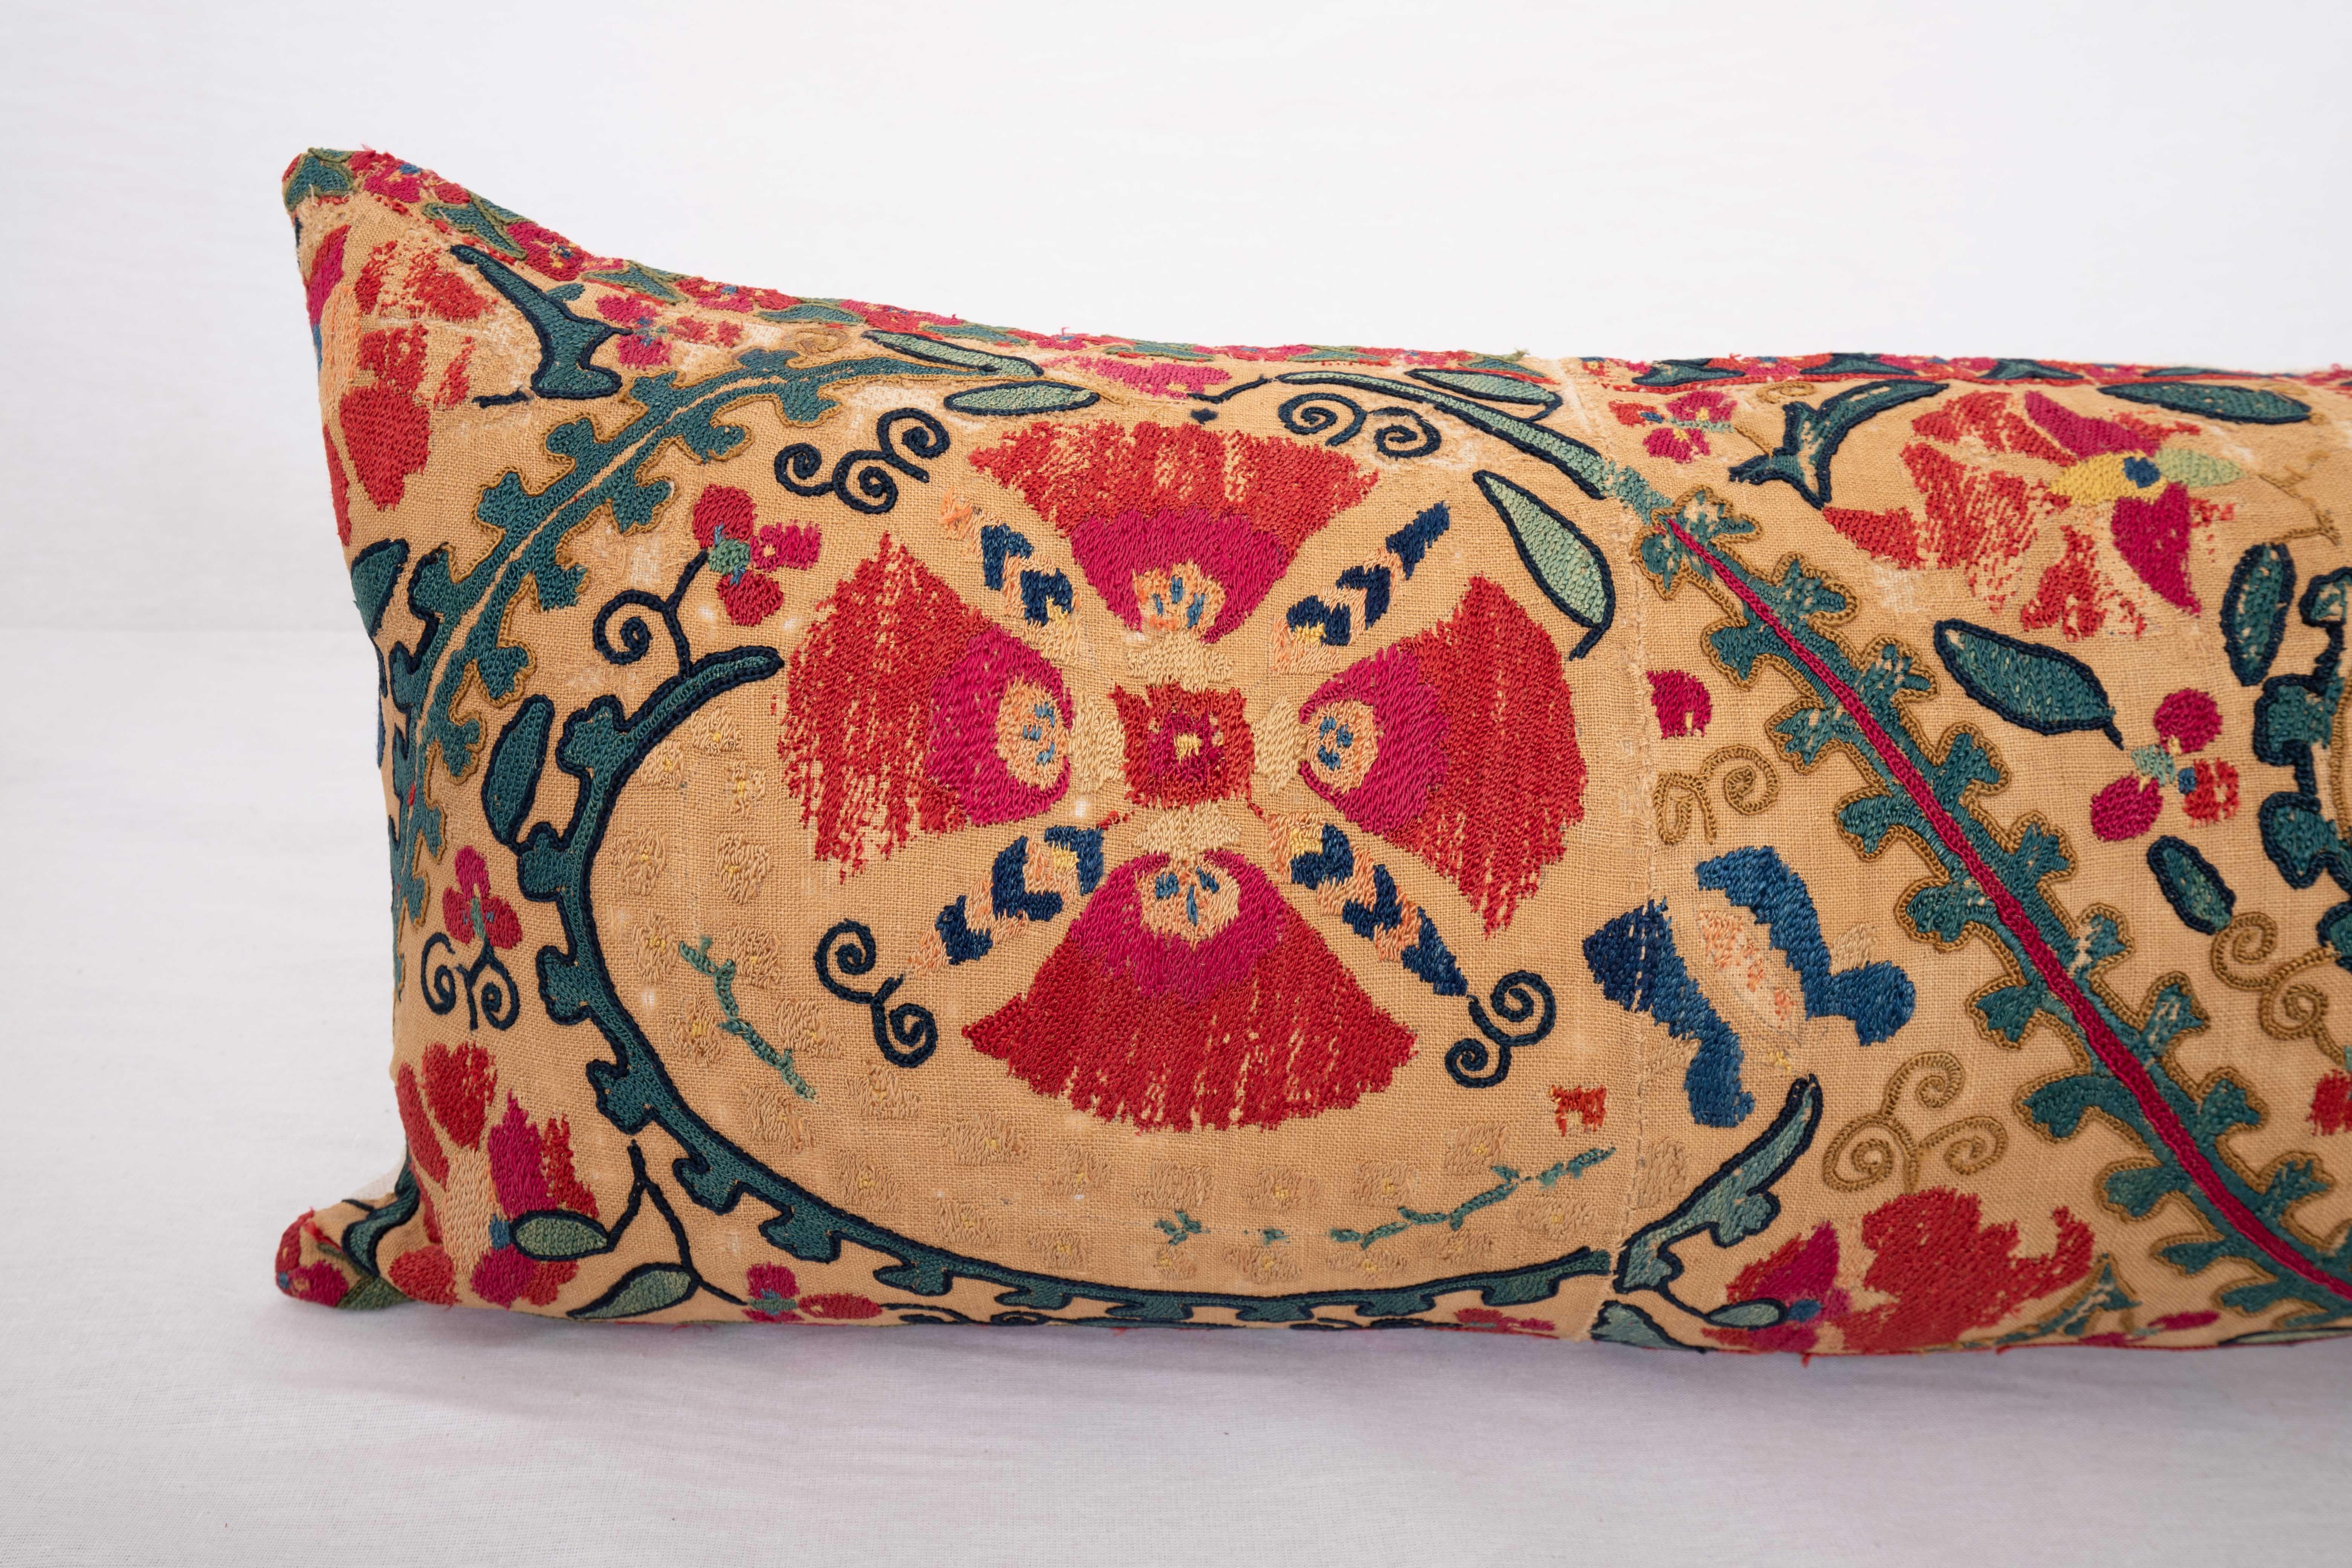 Uzbek Suzani Pillow Case made from an Antique suzani Fragment, 19th C.